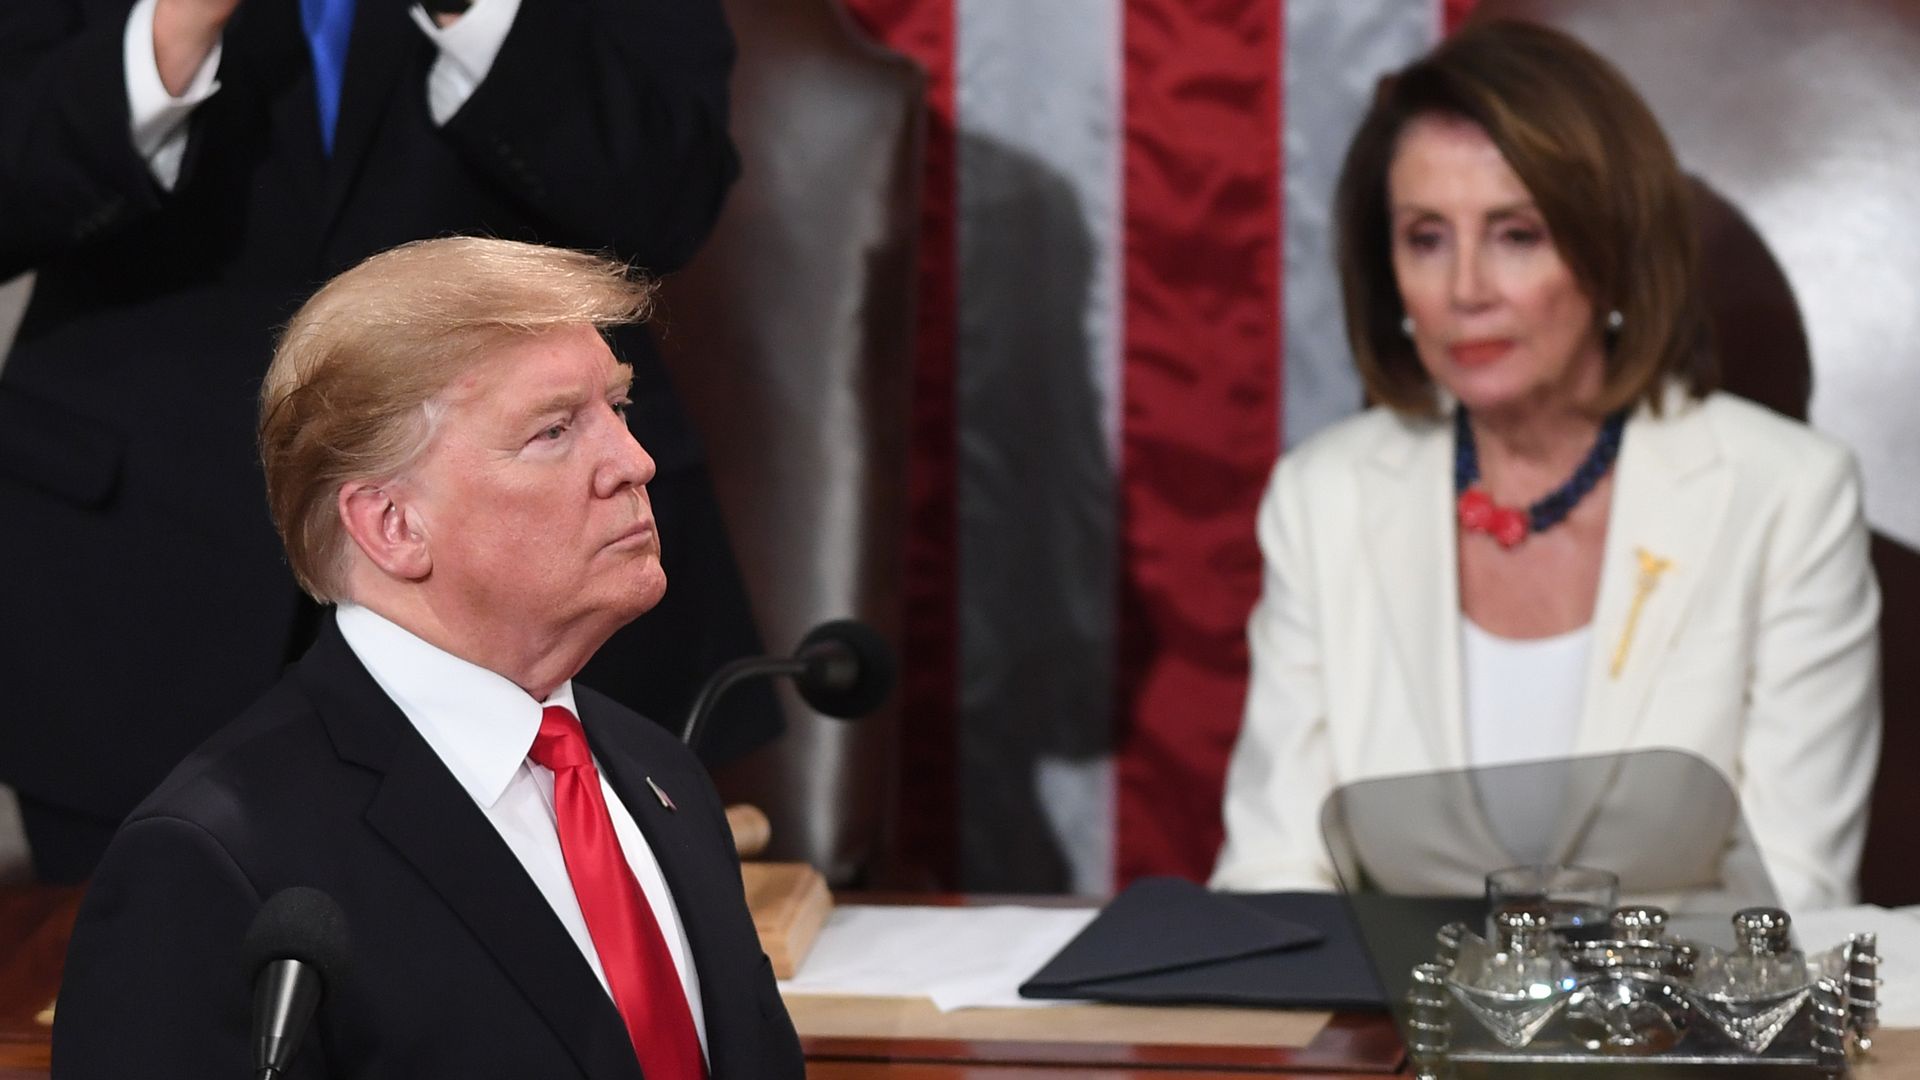 President Trump, flanked by Speaker of the US House of Representatives Nancy Pelosi, delivers the State of the Union address at the US Capitol in Washington, DC, on February 5, 2019. 